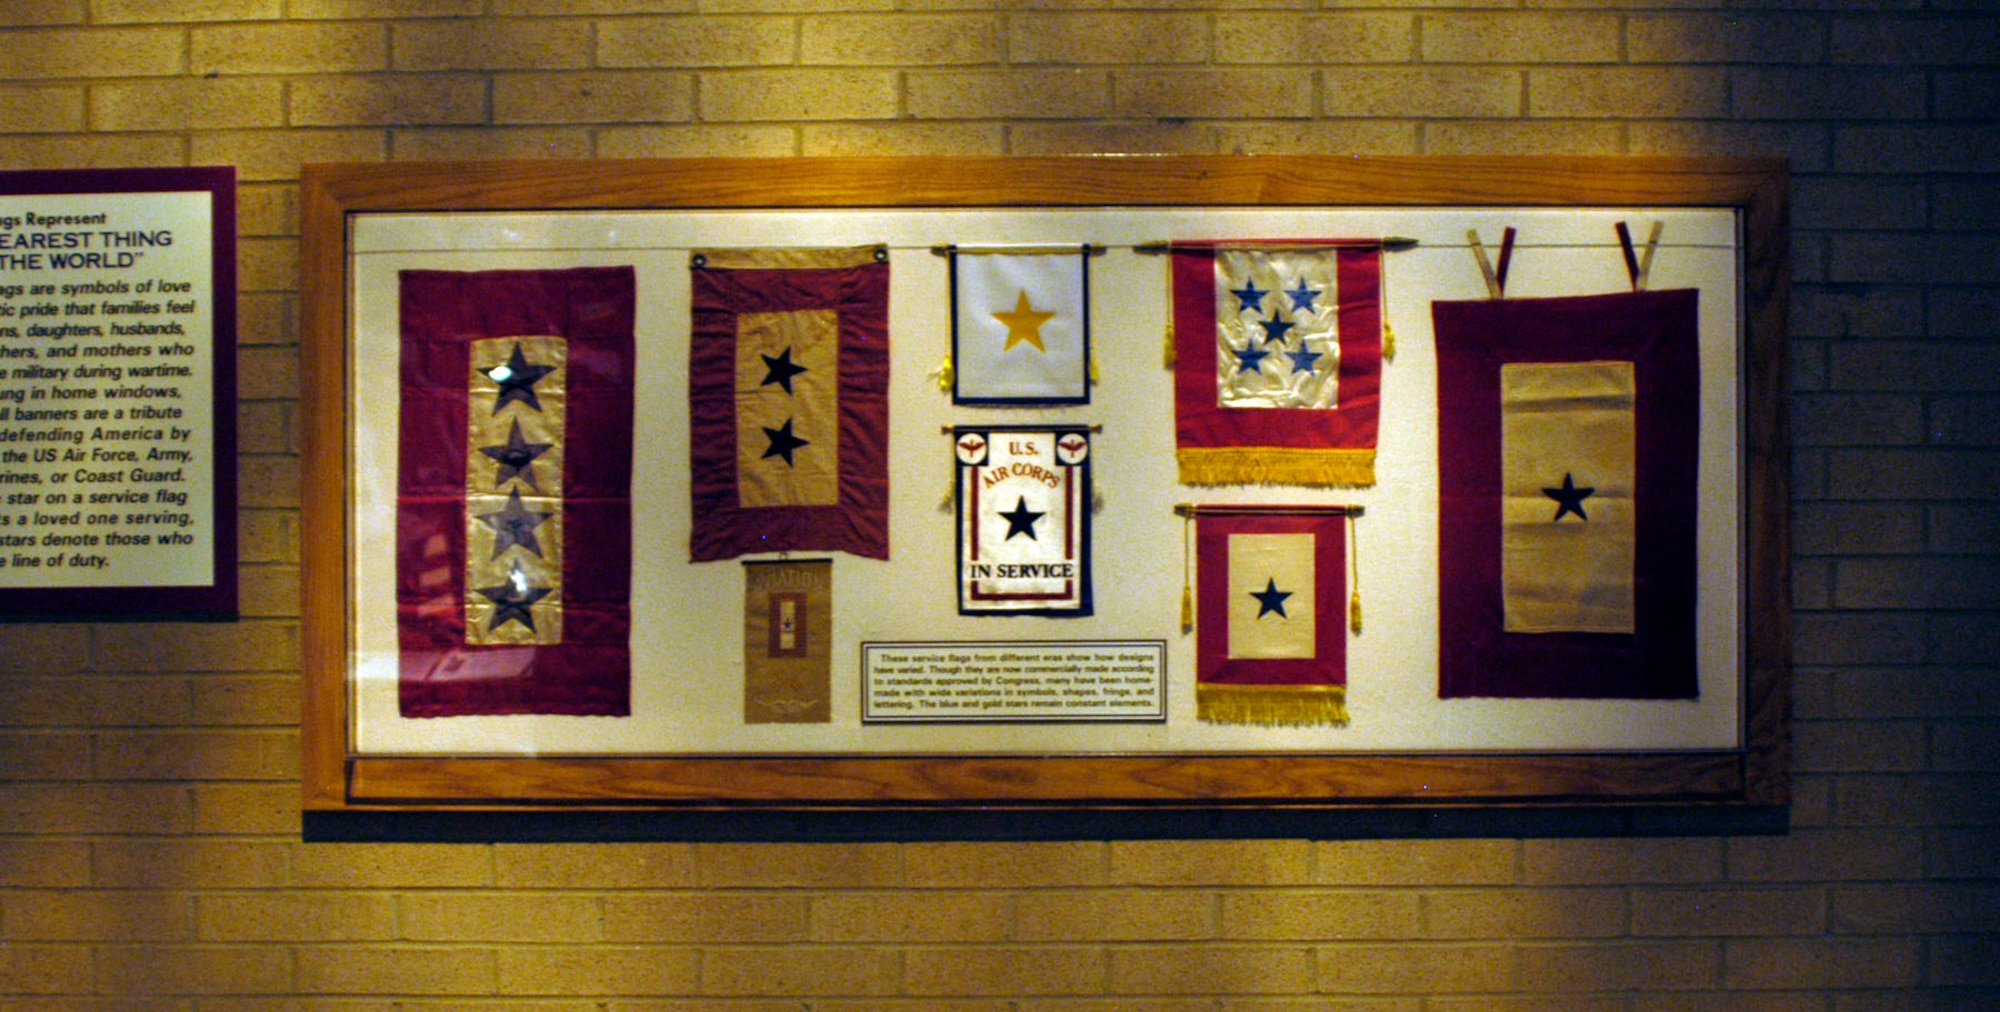 DAYTON, Ohio - These service flags from different eras show how designs have varied. Though they are now commercially made according to standards approved by Congress, many have been home-made with wide variations in symbols, shapes, fringe and lettering. The blue and gold stars remain constant elements. The flags are on display in Kettering Hall at the National Museum of the U.S. Air Force. (U.S. Air Force photo)